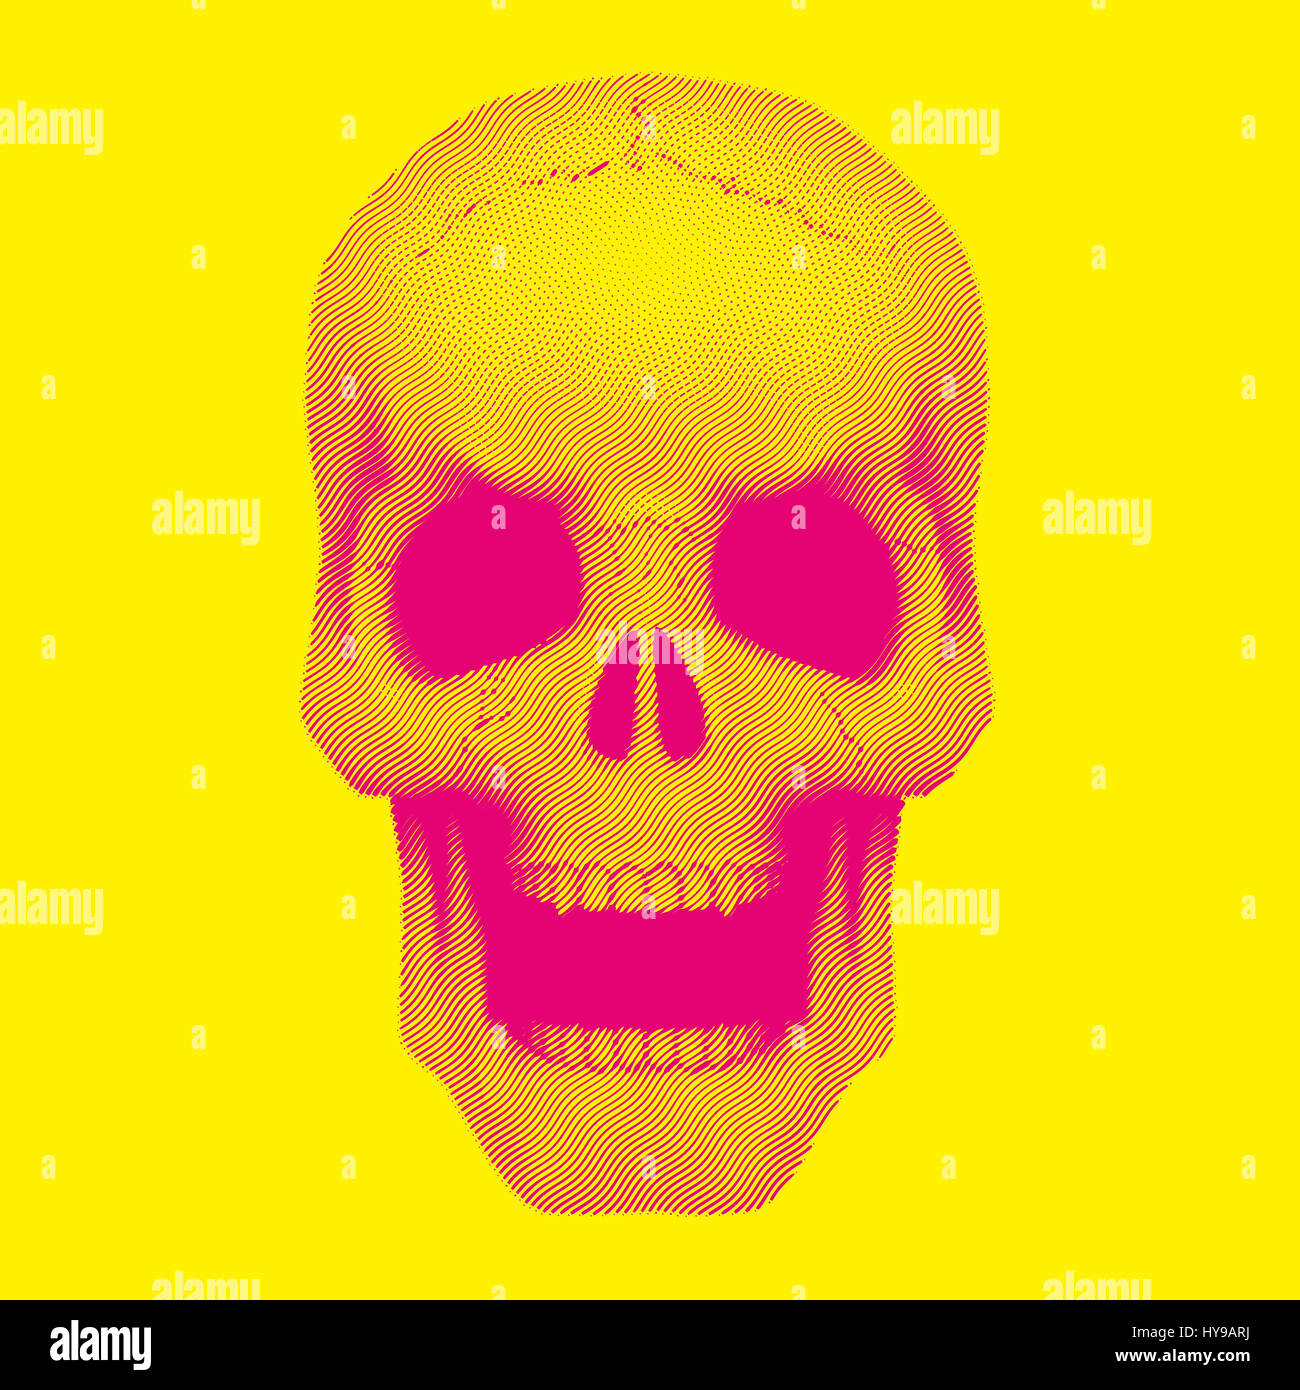 Skull in vintage duotone and halftone style. Stock Photo